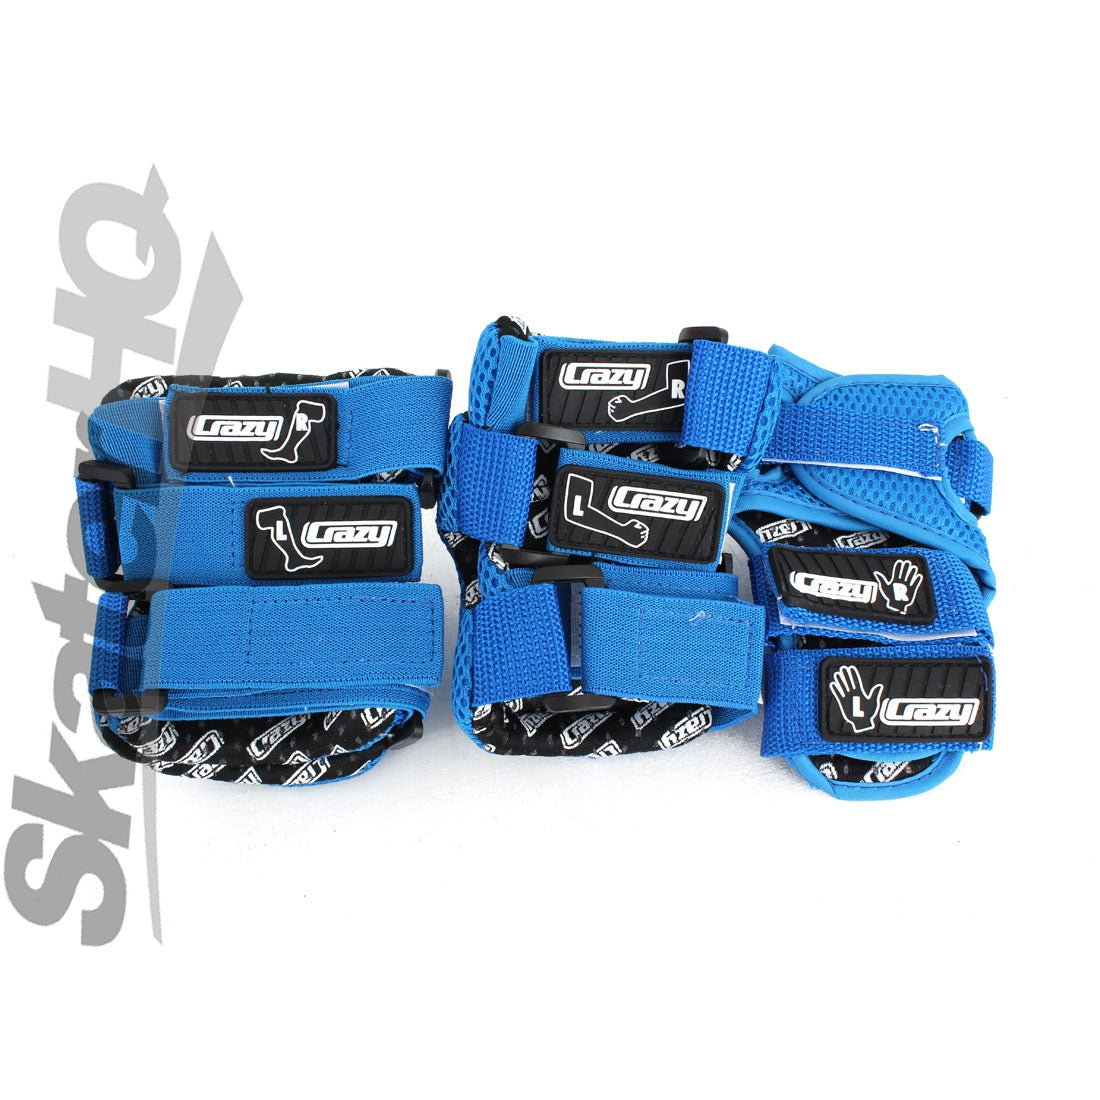 Crazy ProteXion Kids Tri-Pack - Blue Protective Gear